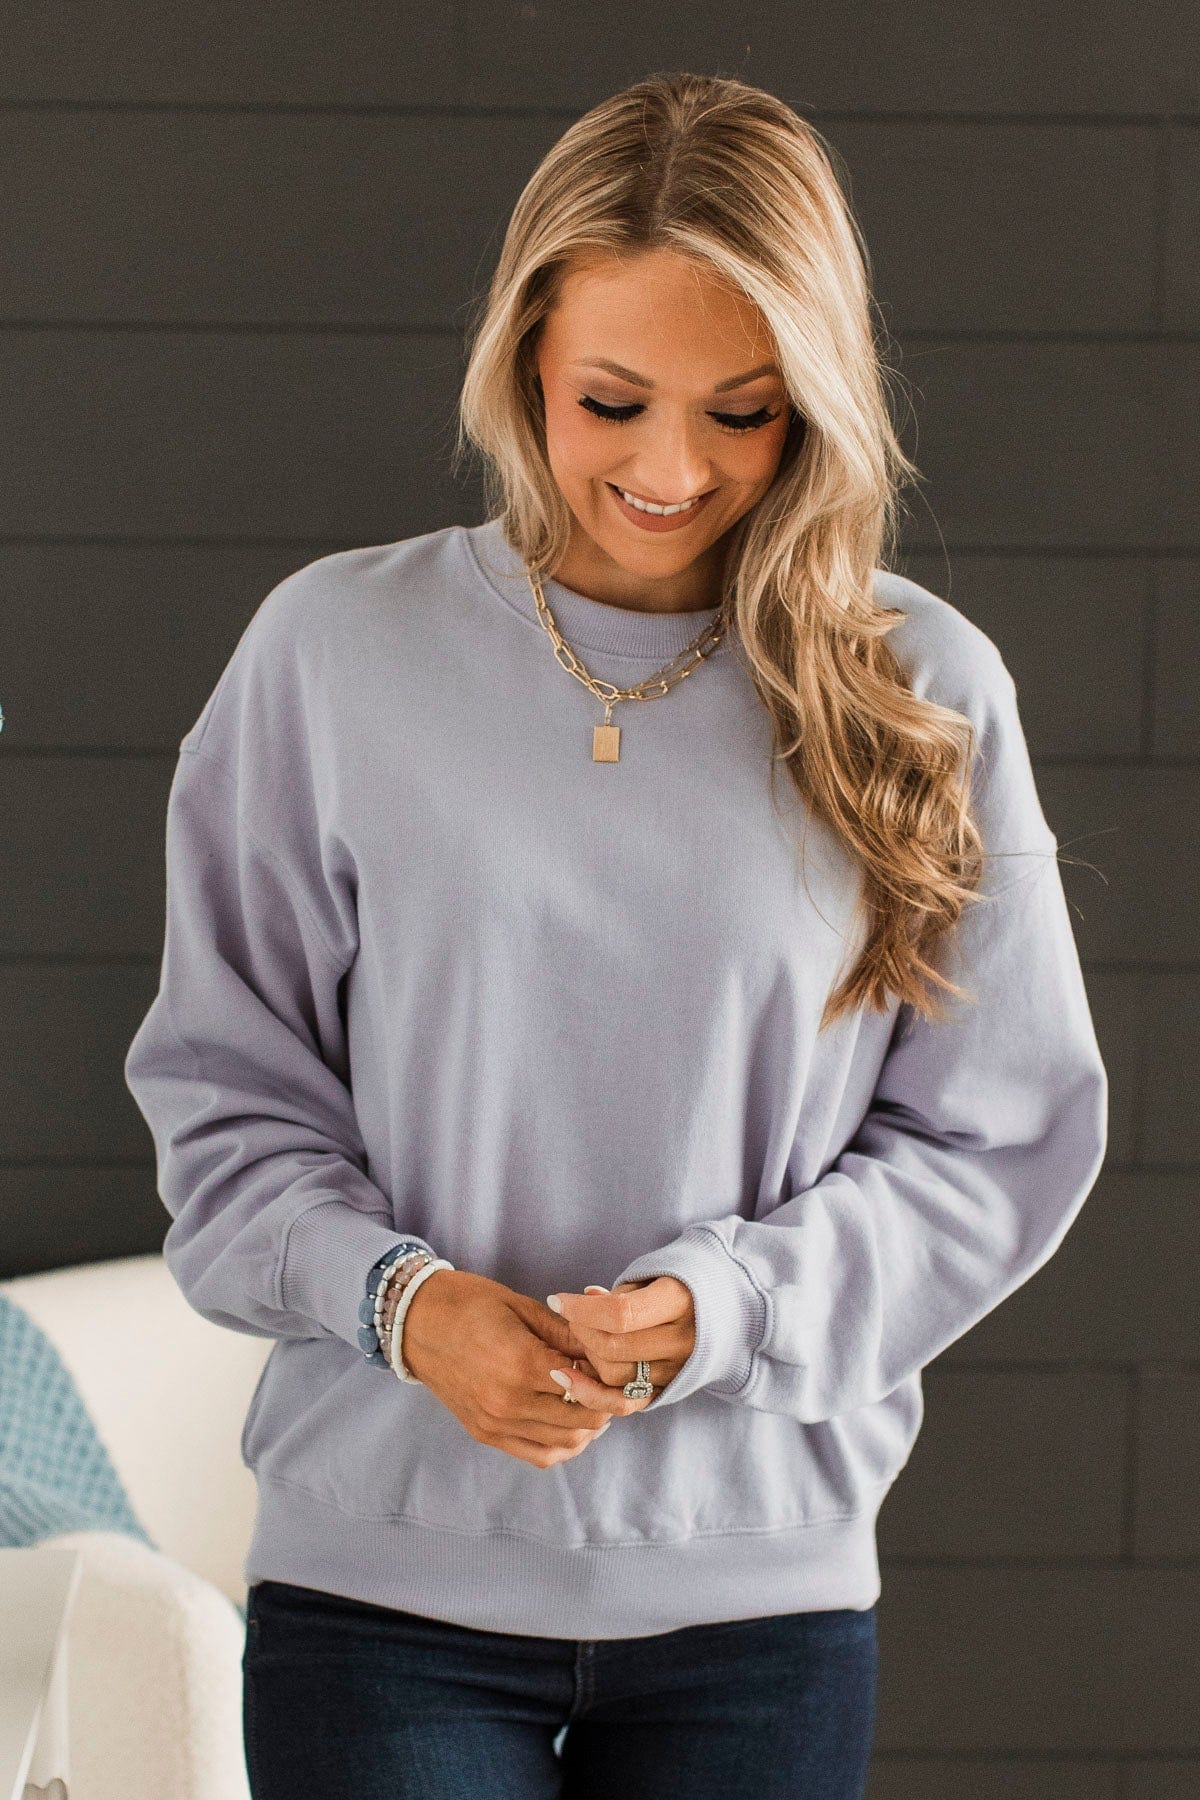 Pictures Of Us Crew Neck Pullover- Periwinkle